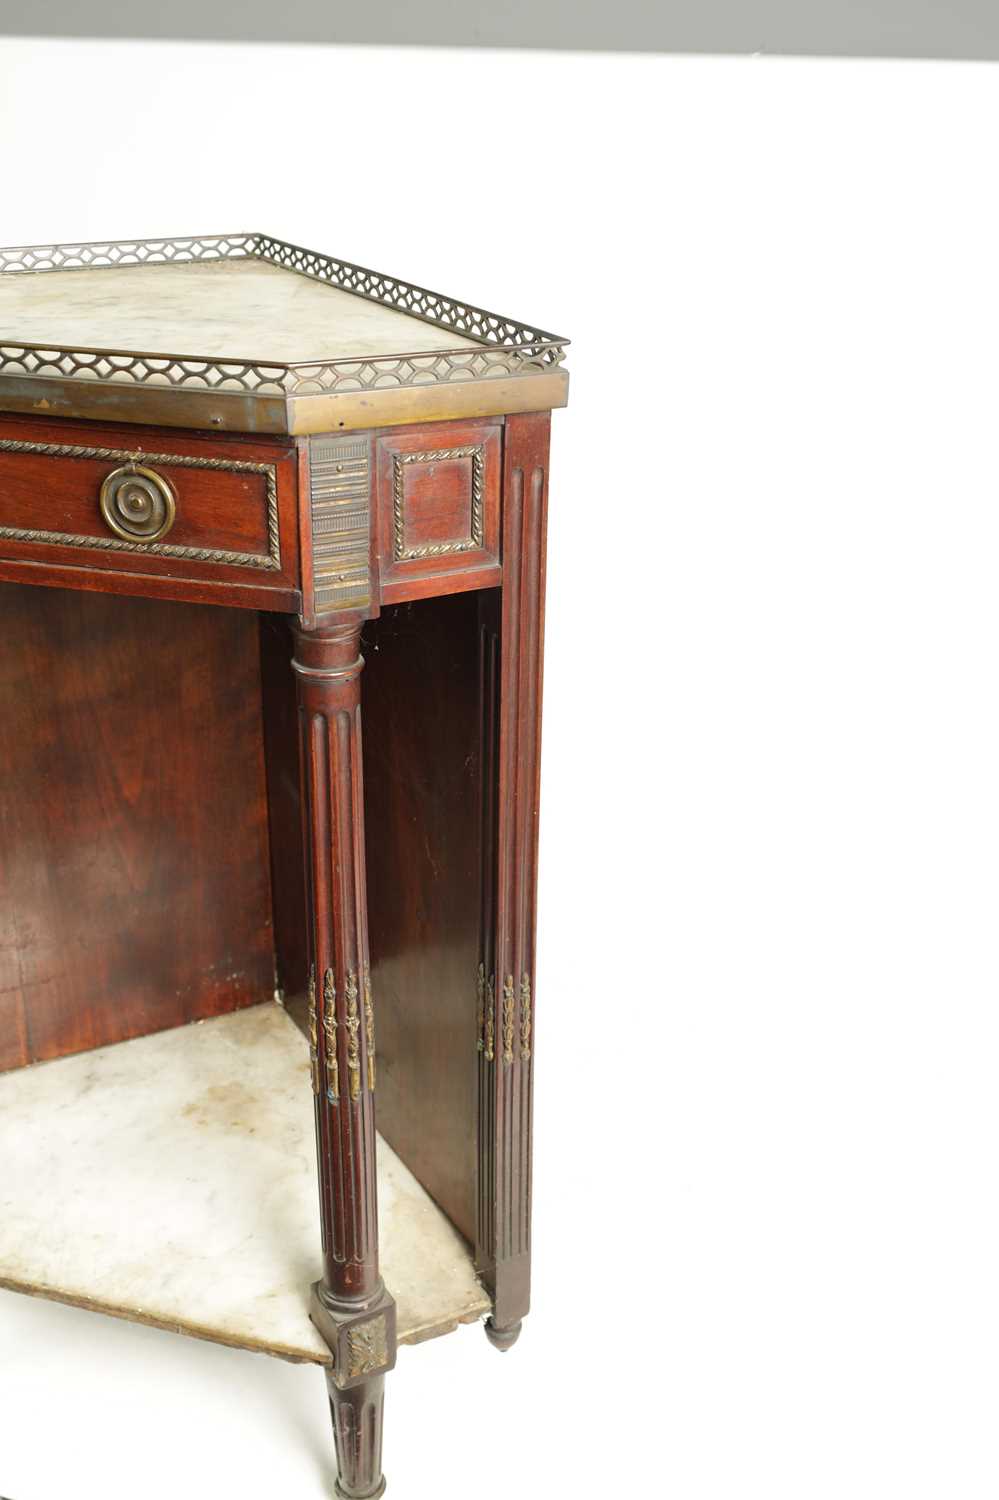 AN EARLY 19TH CENTURY FRENCH MAHOGANY AND WHITE MARBLE ORMOLU MOUNTED CORNER TABLE - Image 4 of 8